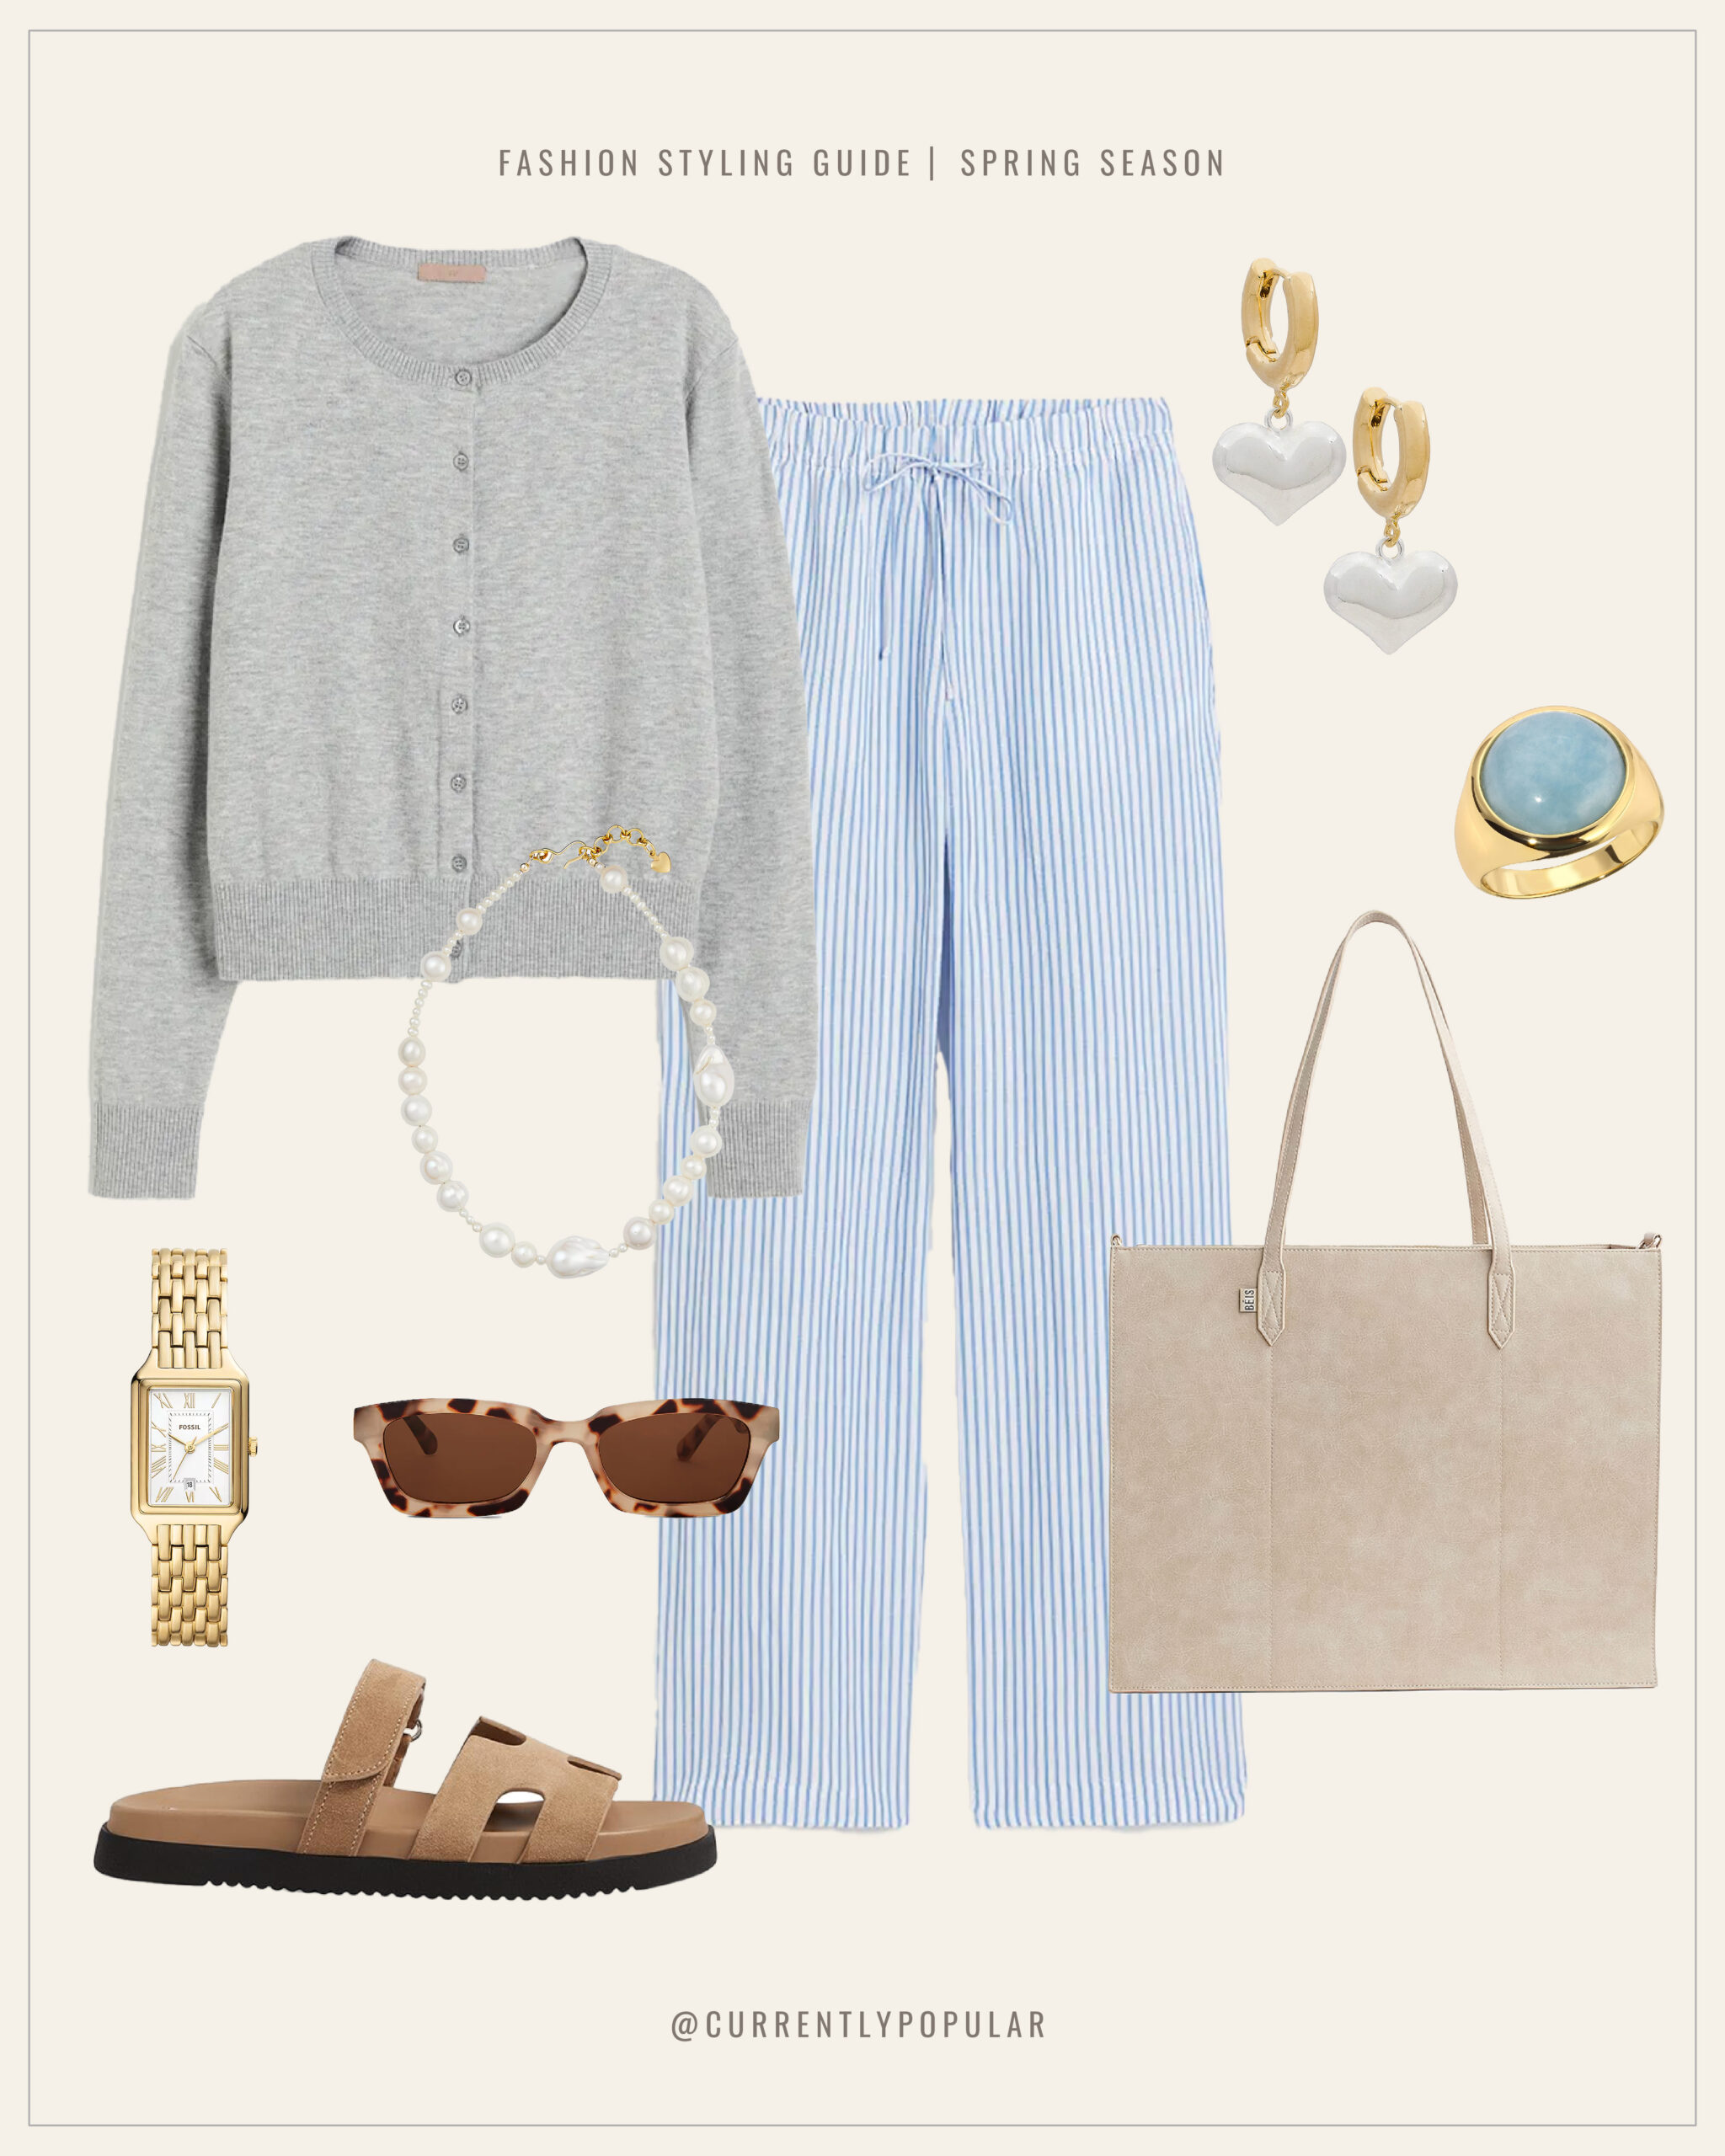 Fashion styling guide for the winter season, featuring a cozy gray cardigan paired with light blue and white striped pajama pants. Accessories include a pair of hoop earrings with heart-shaped pendants, a gold watch, a ring with a large blue stone, and brown tortoiseshell sunglasses. The look is completed with tan flat sandals and a light beige tote bag. The text '@currentlypopular' indicates the source of the fashion guide.